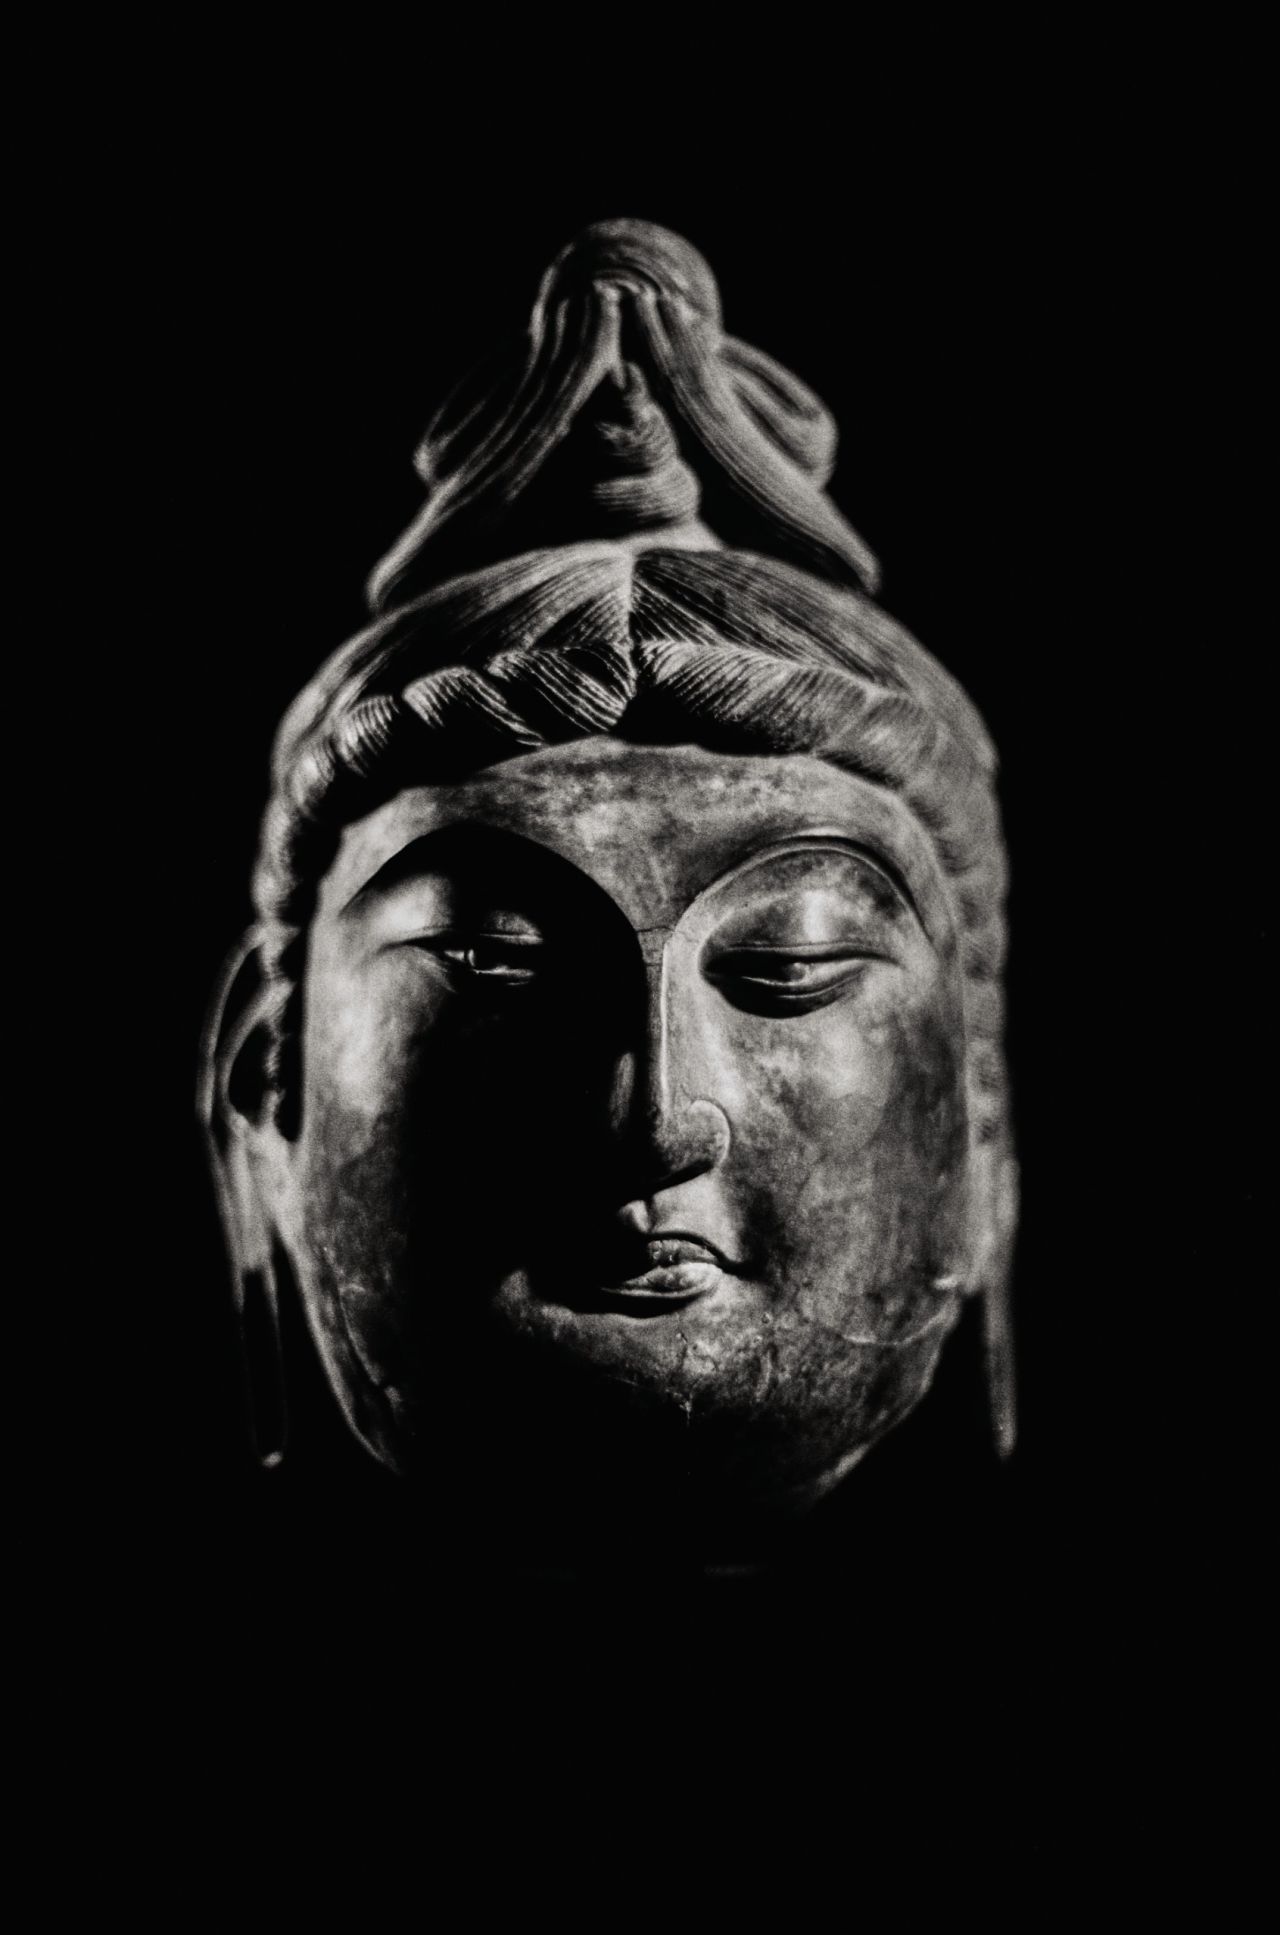 Bodhisattva Avolokitsvera dry lacquer head, Tang Dynasty, estimate $2,319,480-$3,221,500 (HK$18,000,000-$25,000,000). With slender bow-shaped eyes and hooded eyelids, this rare lacquer head is sensitively modeled.